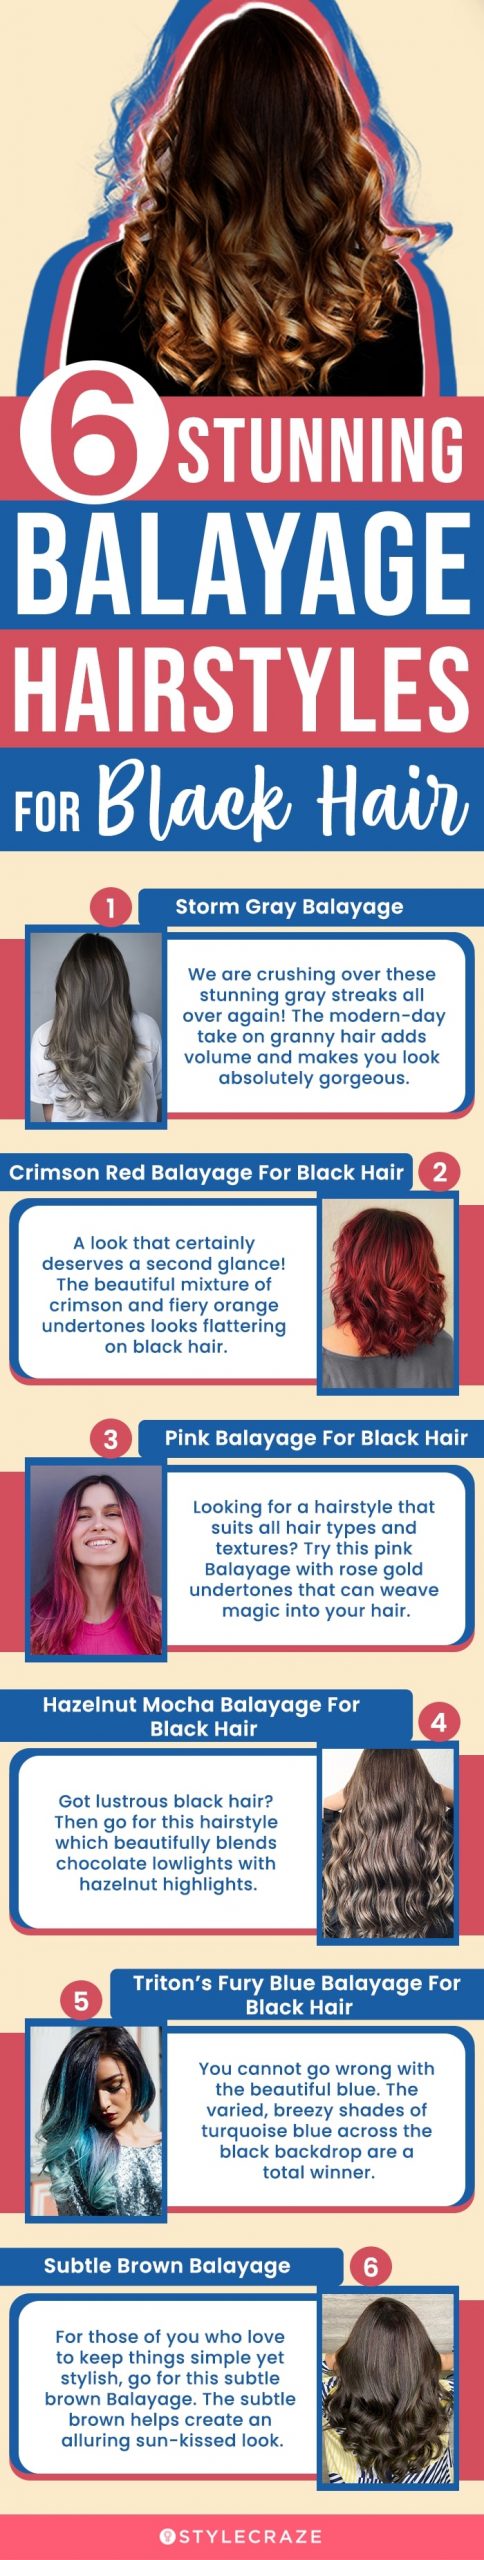 6 stunning balayage hairstyles for black hair [infographic]